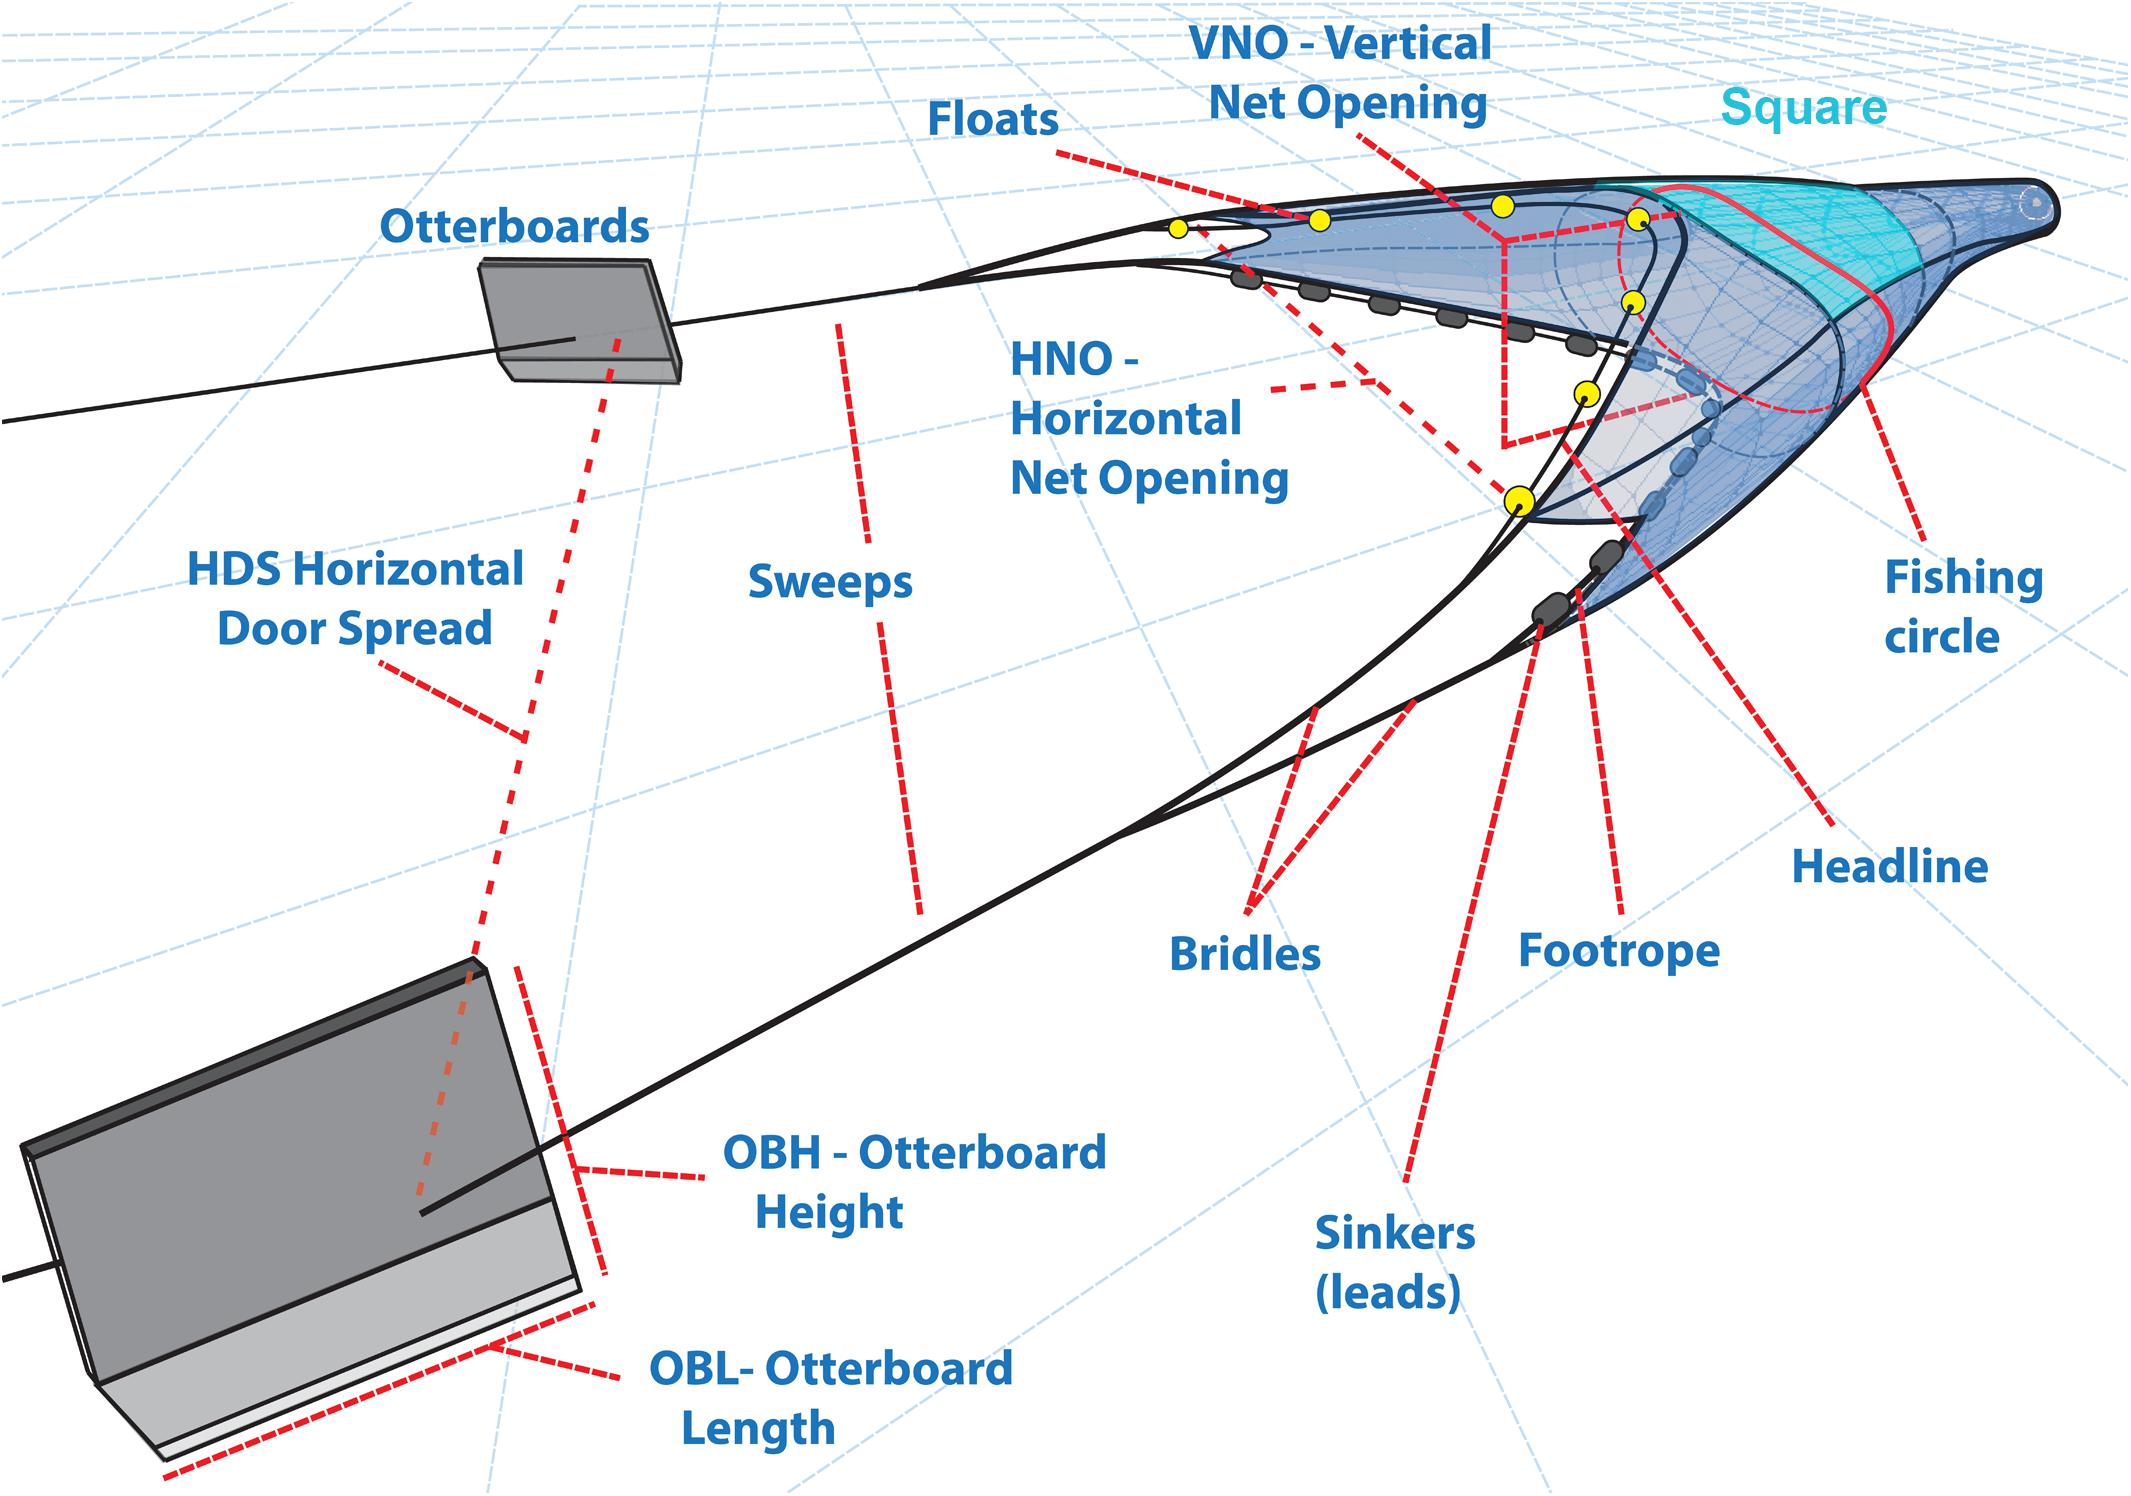 Frontiers  Trawling in the Mediterranean: An Exploration of Empirical  Relations Connecting Fishing Gears, Otterboards and Propulsive  Characteristics of Fishing Vessels